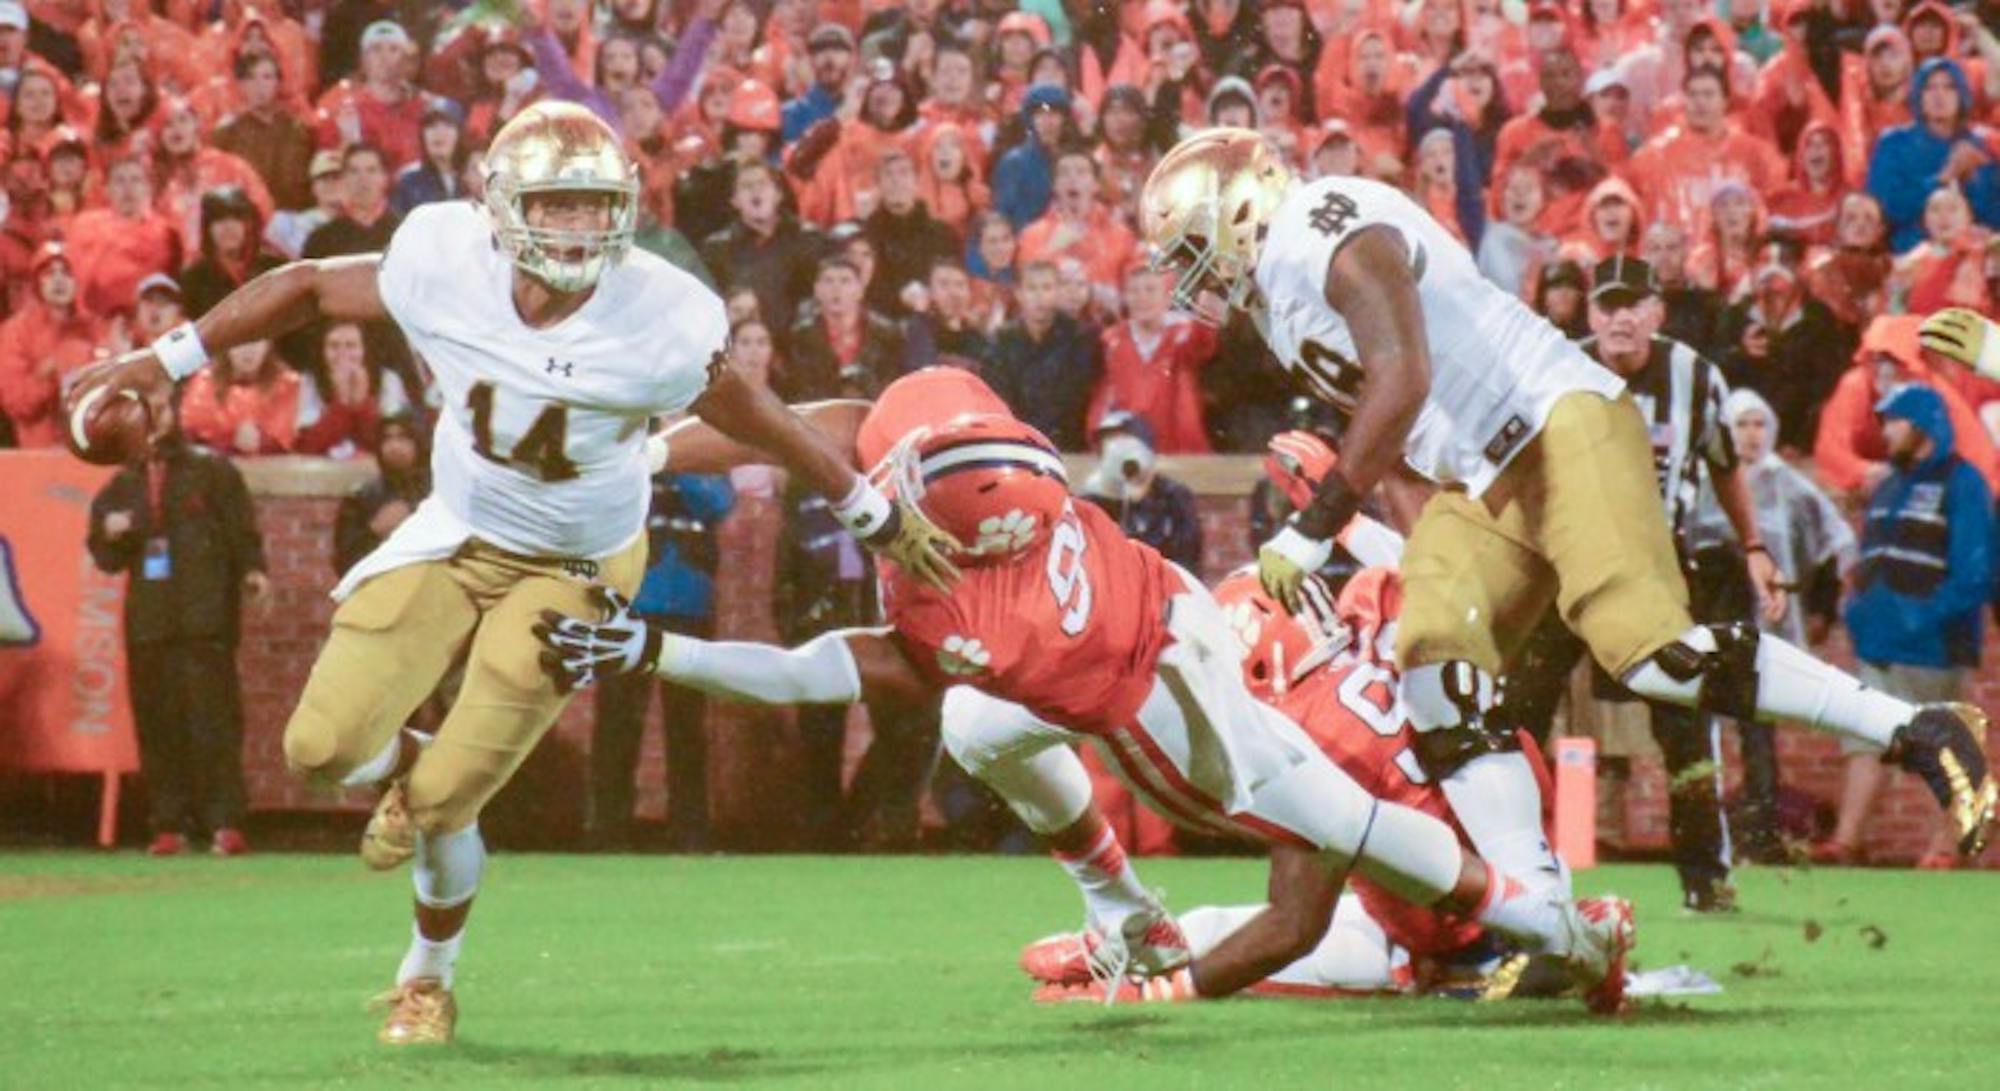 Sophomore quarterback DeShone Kizer breaks a tackle during Notre Dame’s loss to No. 6 Clemson on Saturday at Memorial Stadium. The Irish coaching staff has praised his poise and leadership despite the loss. Notre Dame will look to rebound this Saturday when it welcomes Navy to campus.